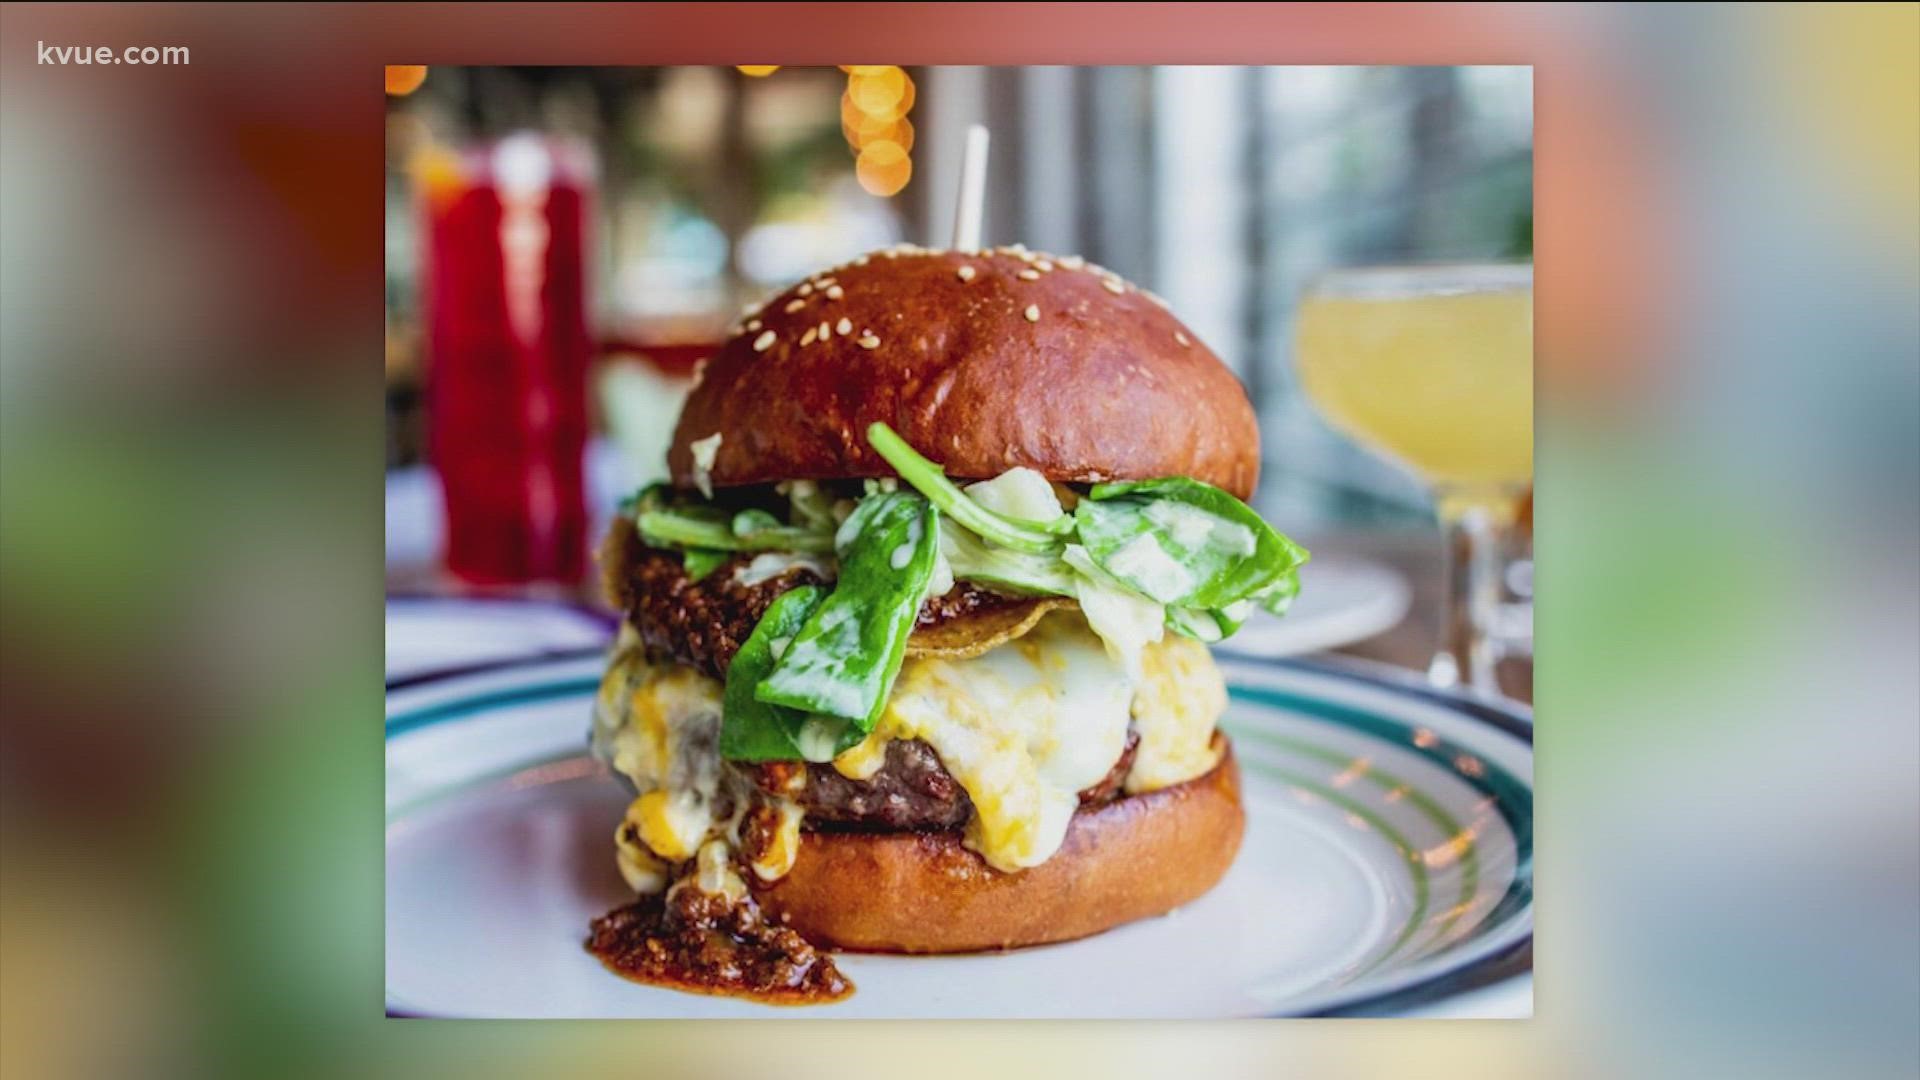 The burger has been ranked the 14th best burger in the world.